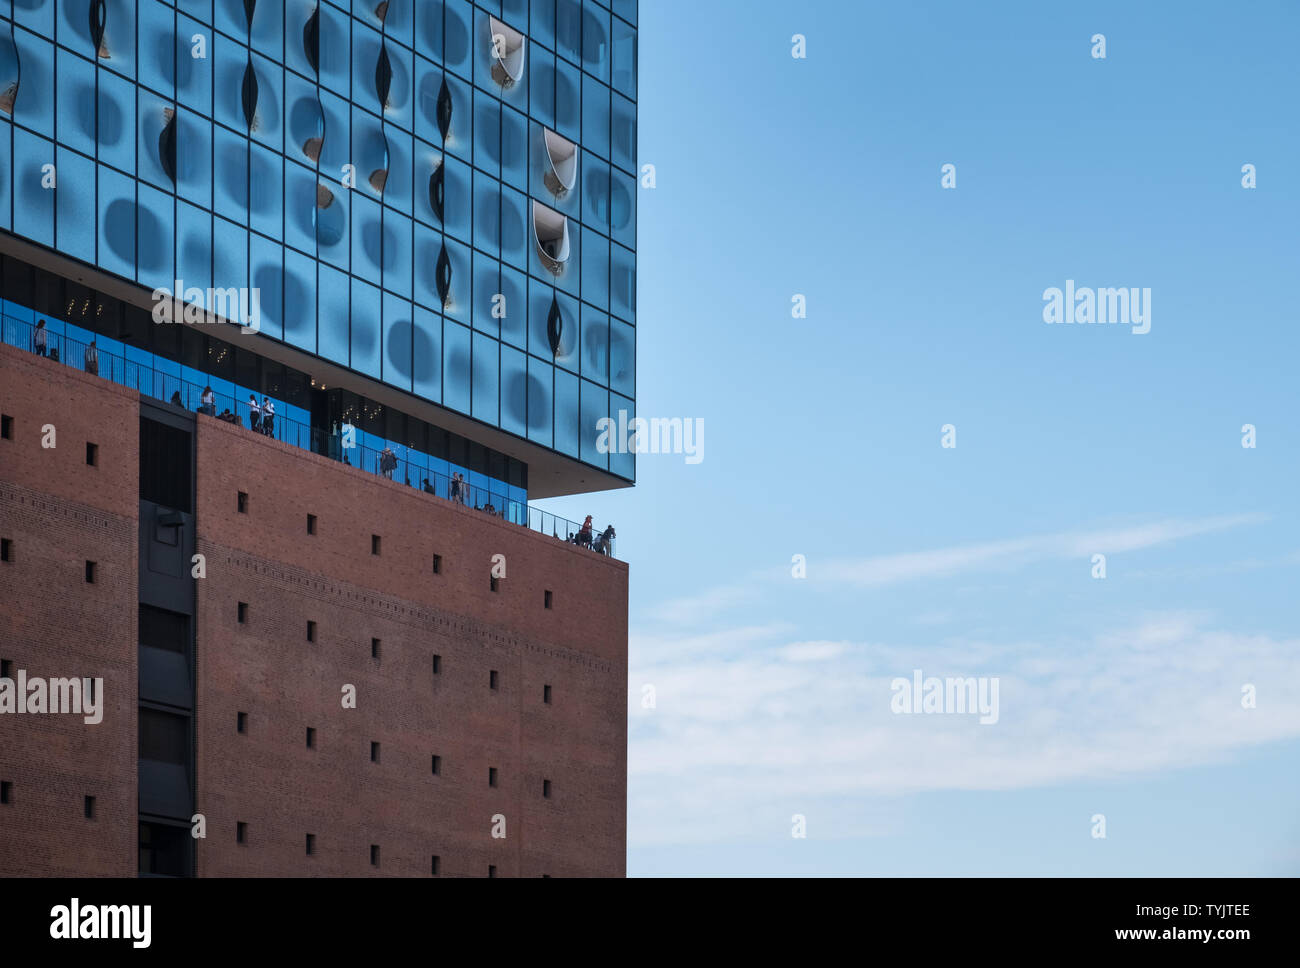 Elbphilharmonie (Elbe Philharmonic Hall), a modern concert hall with contemporary architecture in HafenCity, Hamburg, Germany. Stock Photo